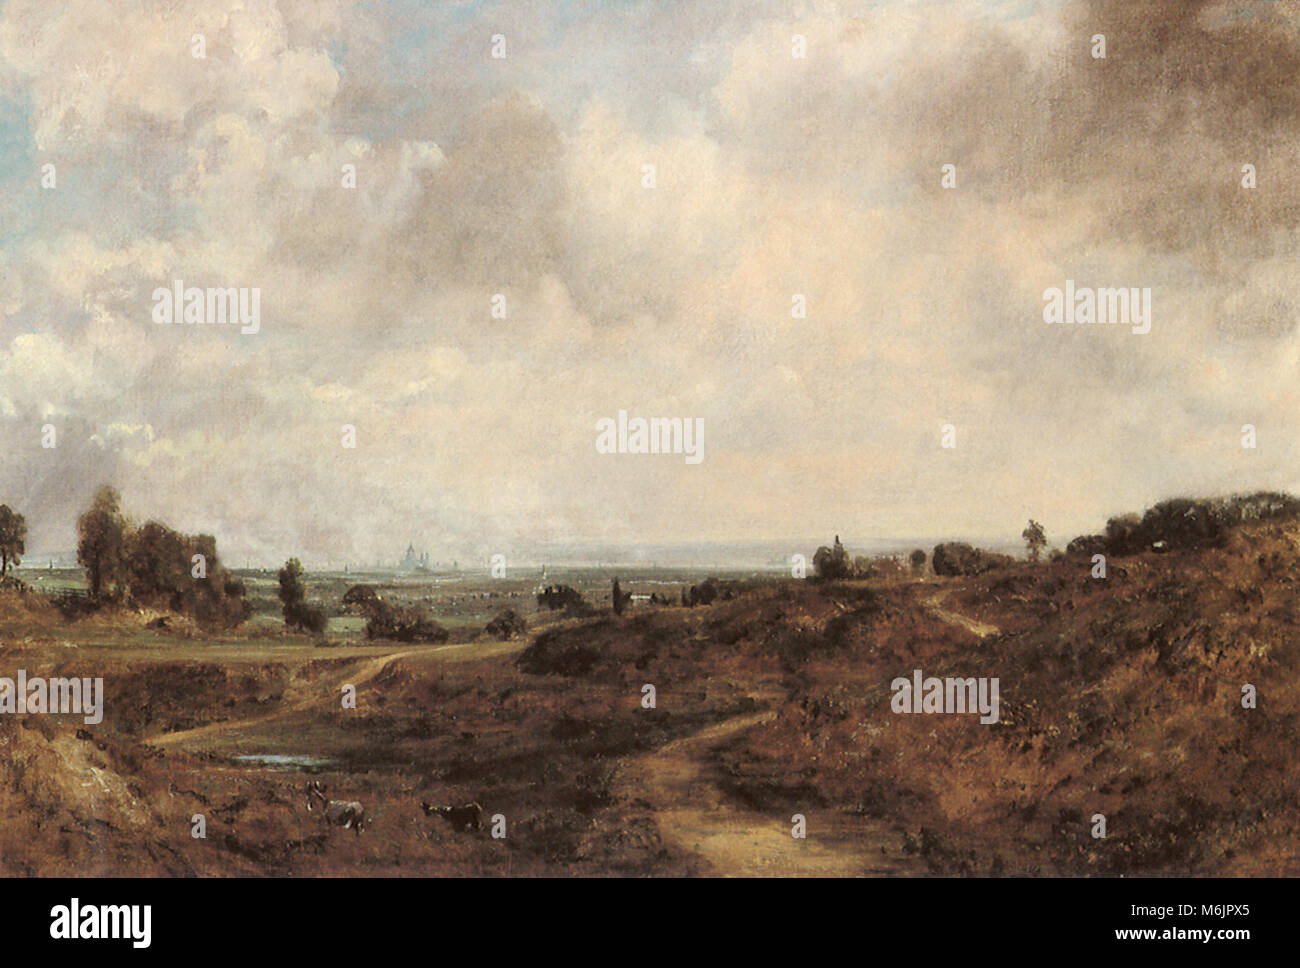 Hampstead Heath with London in the Distance, Constable, John, 1828. Stock Photo